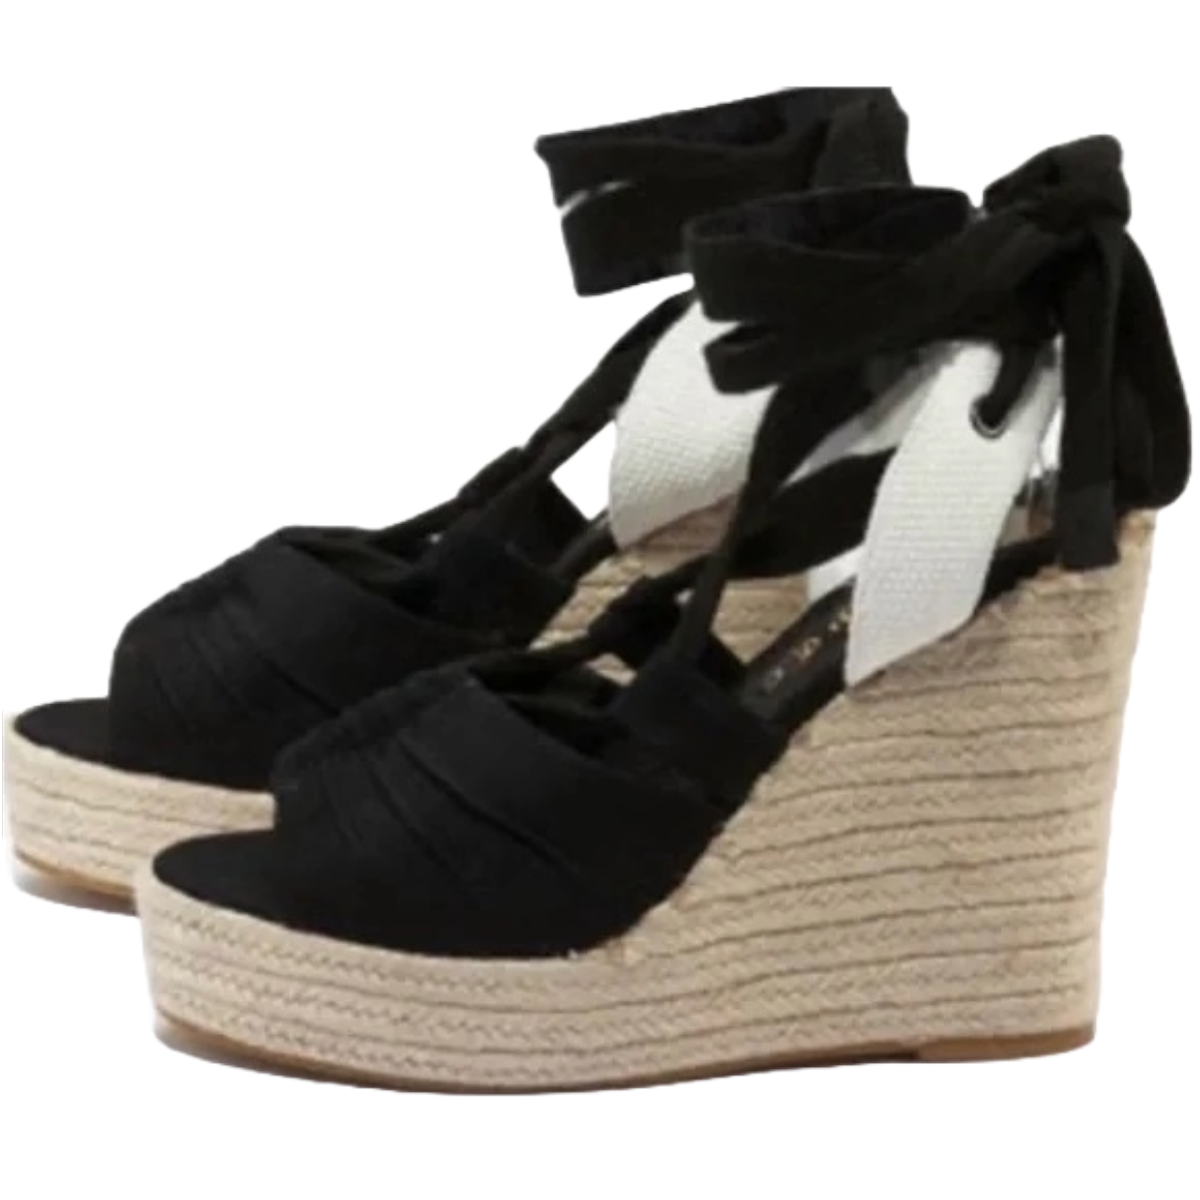 Juicy Couture Ankle-Wrap Wedges.png